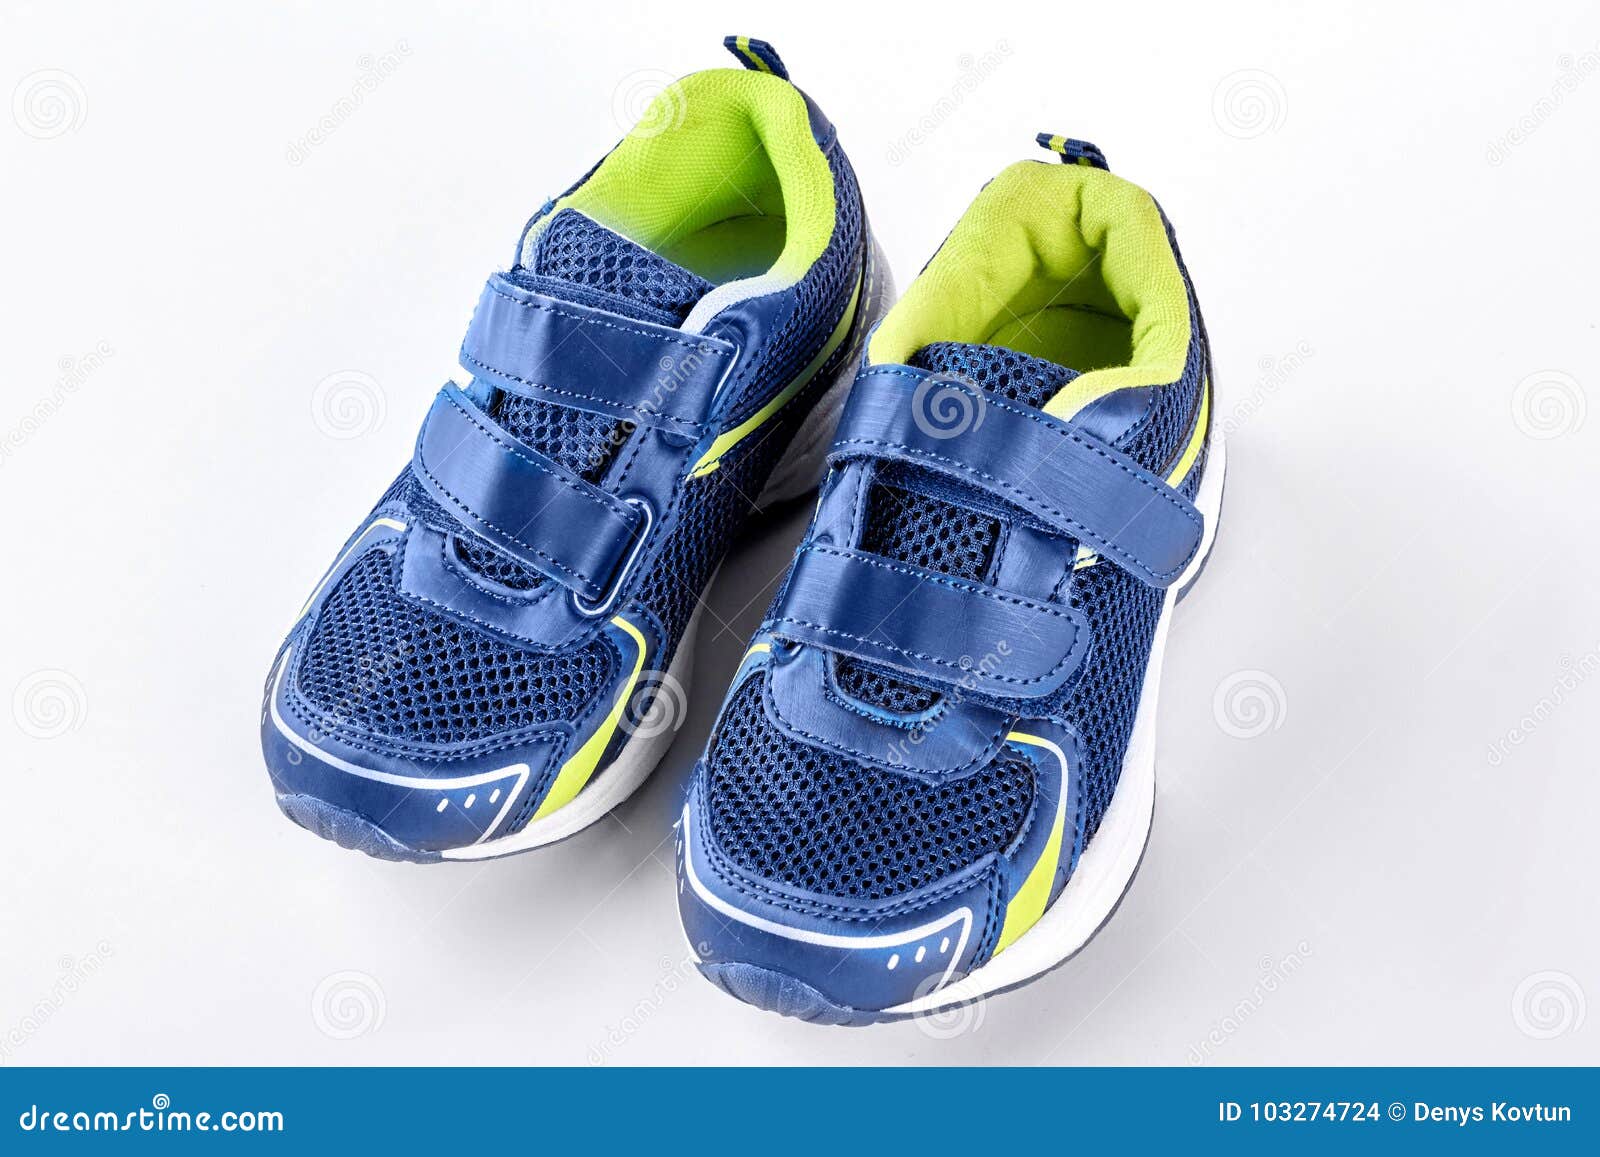 Pair of Blue Trainers on White Background. Stock Photo - Image of foot ...